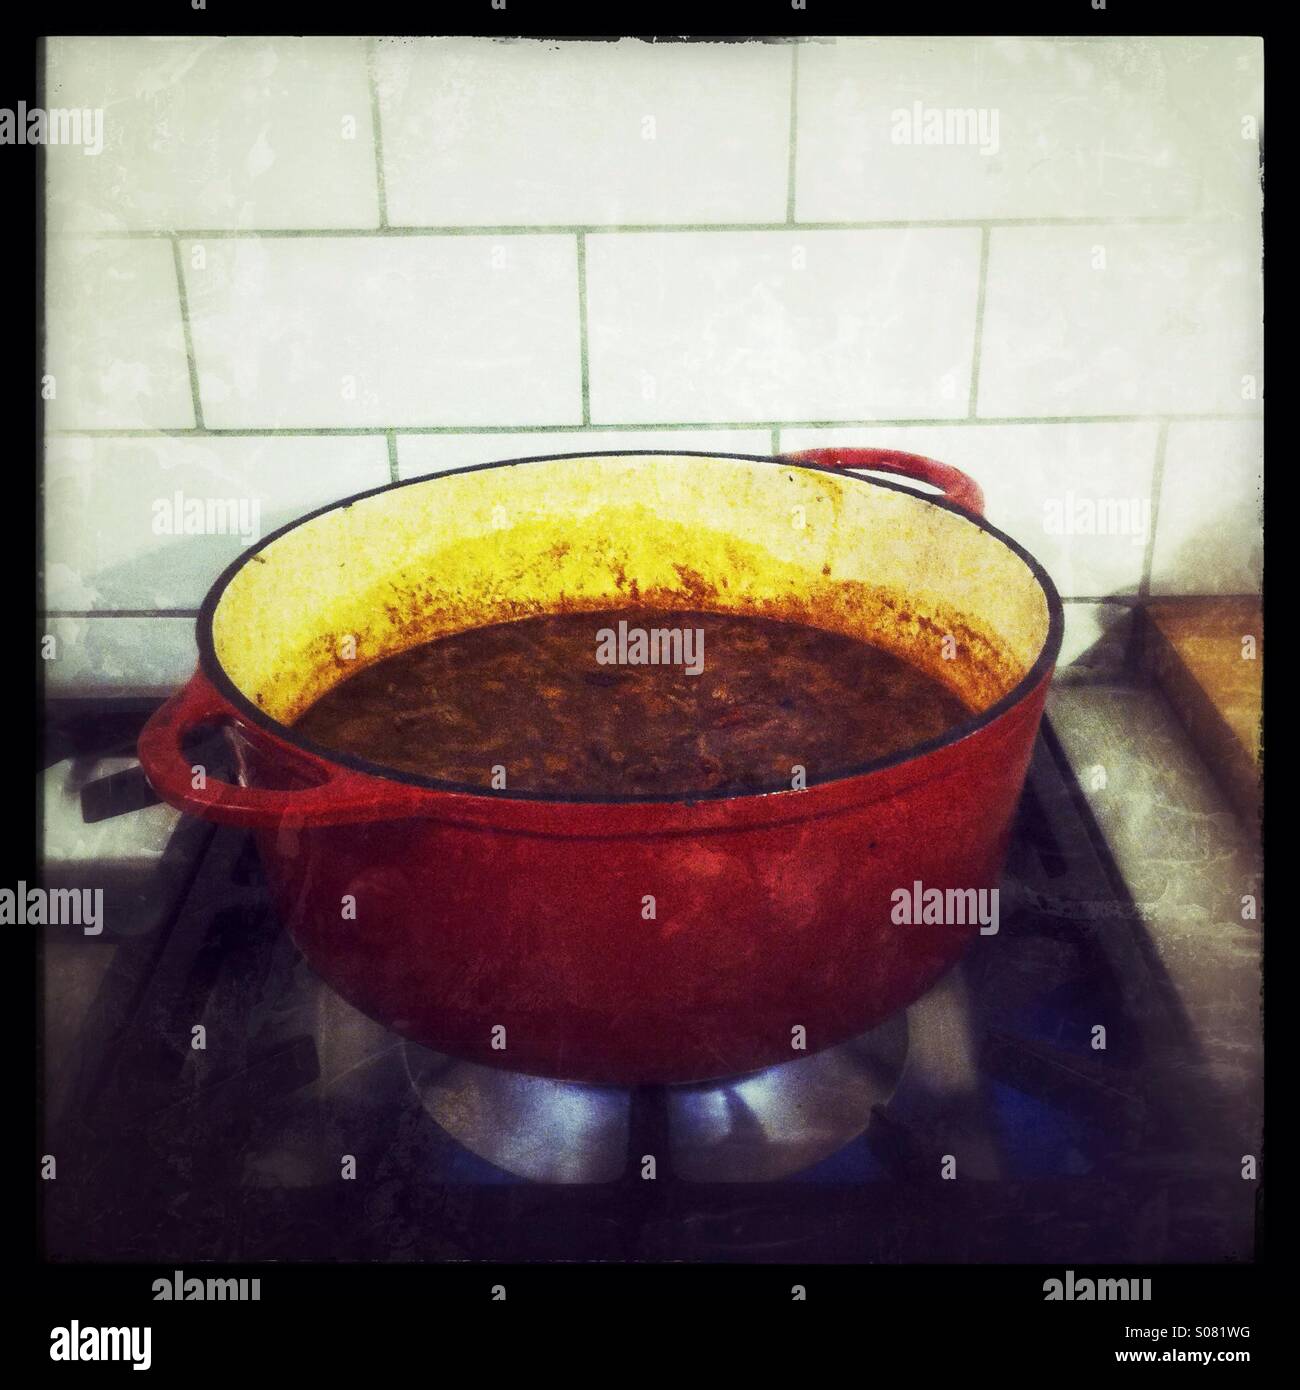 Chilli cooking in a large cast iron cooking pot Stock Photo